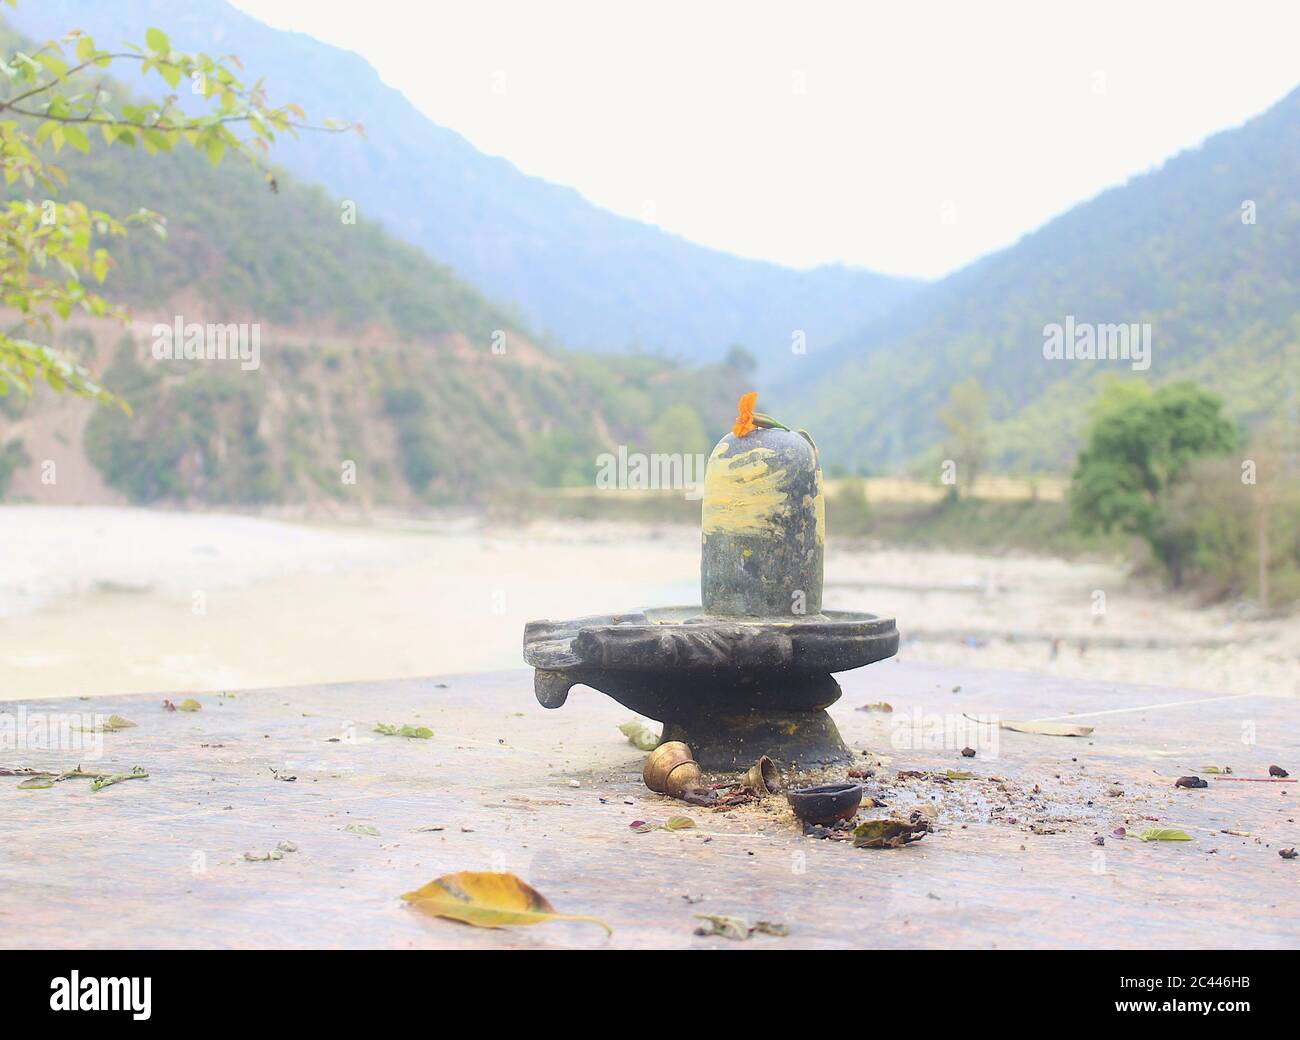 shiva linga in the river bank. this pic is taken in uttarakhand, india. Stock Photo